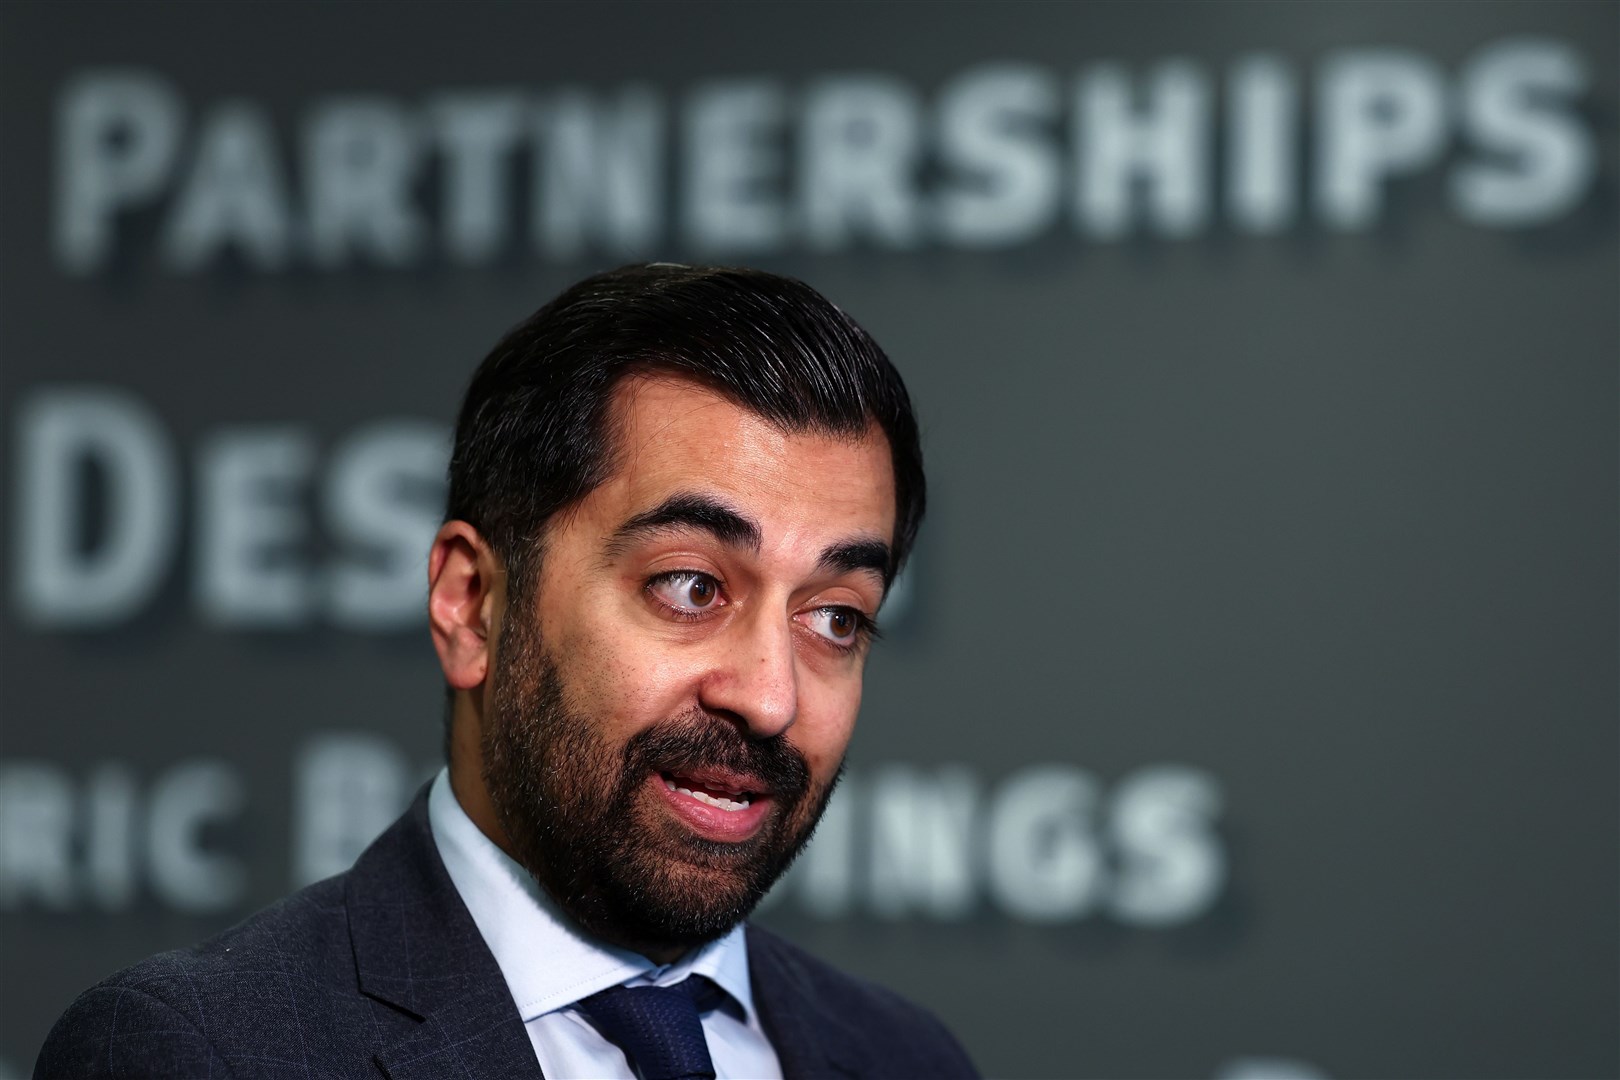 Humza Yousaf urged Rishi Sunak and Sir Keir Starmer to back compensation for the women affected (Jeff J Mitchell/PA)